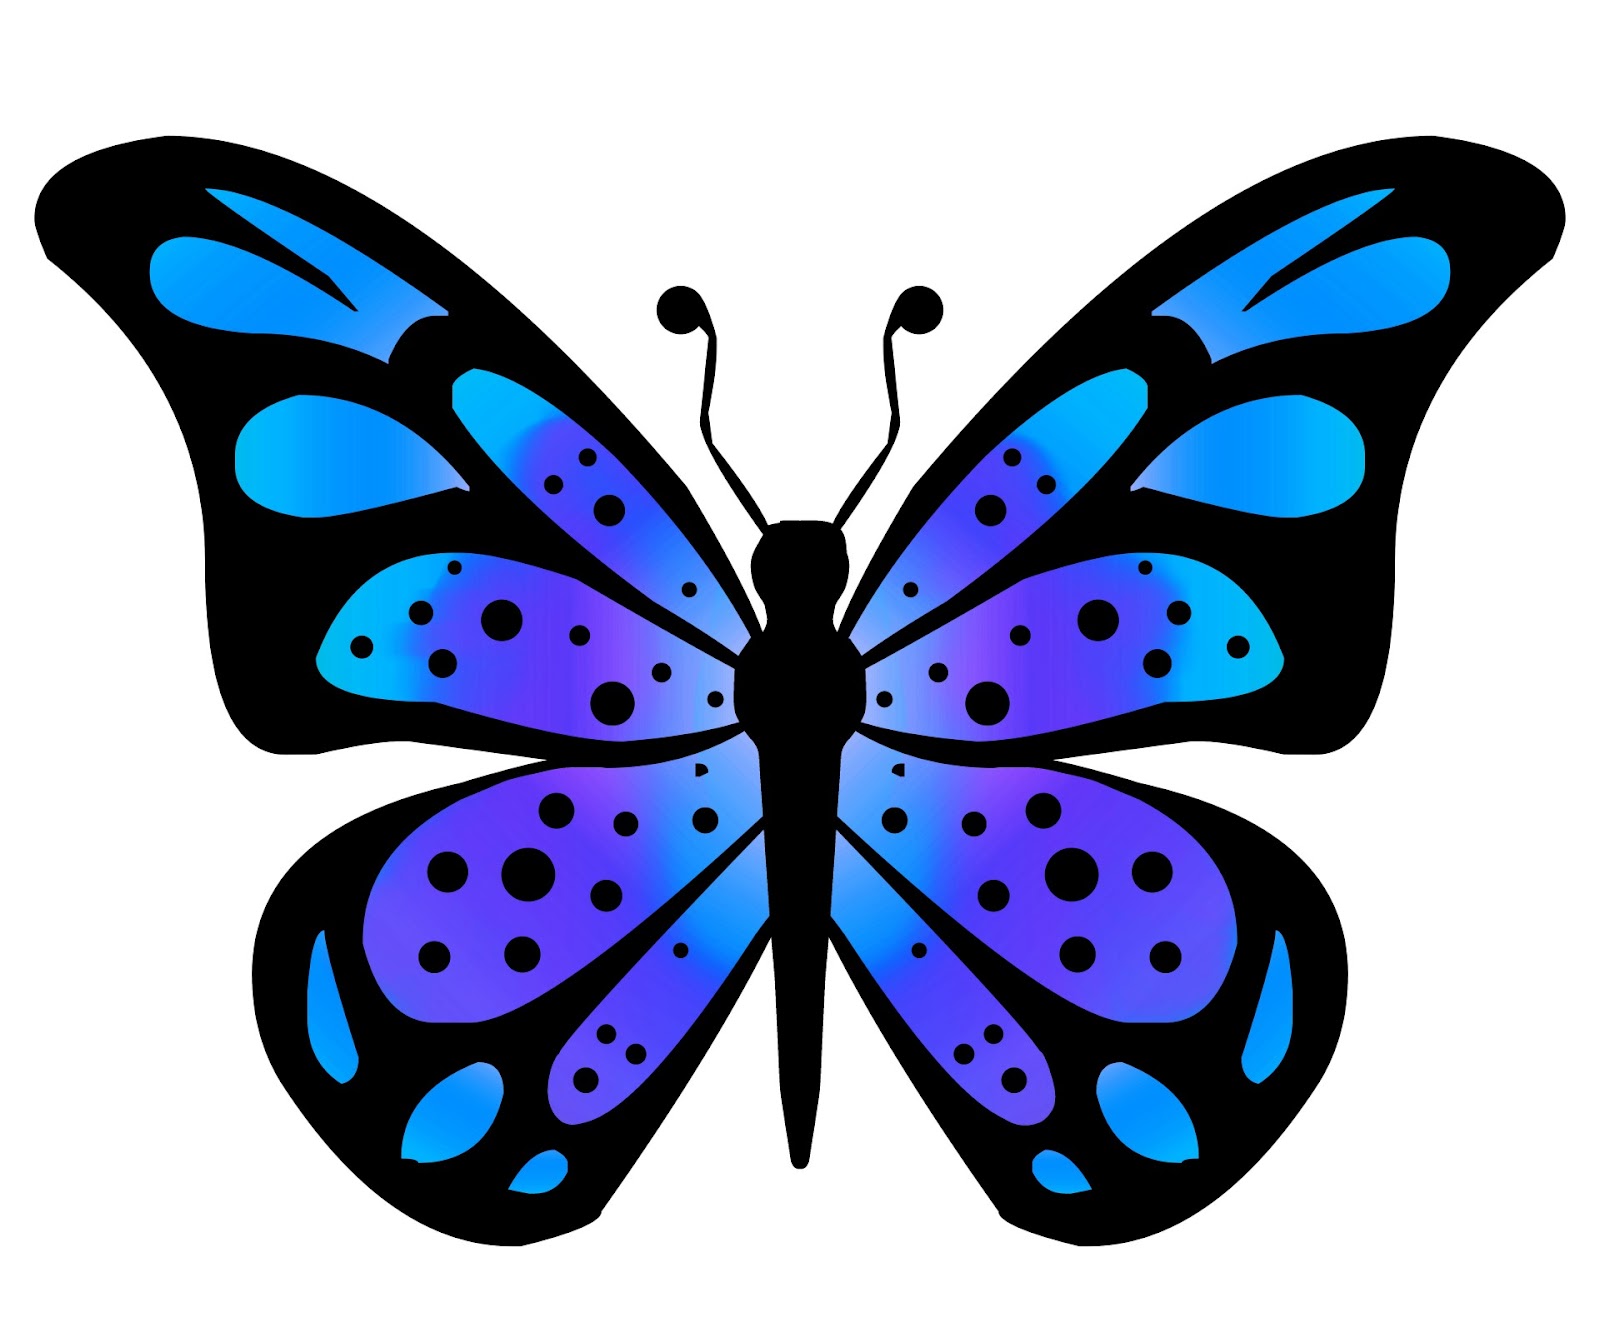 Clipart Butterfly 3 Free Stock Photo - Public Domain Pictures